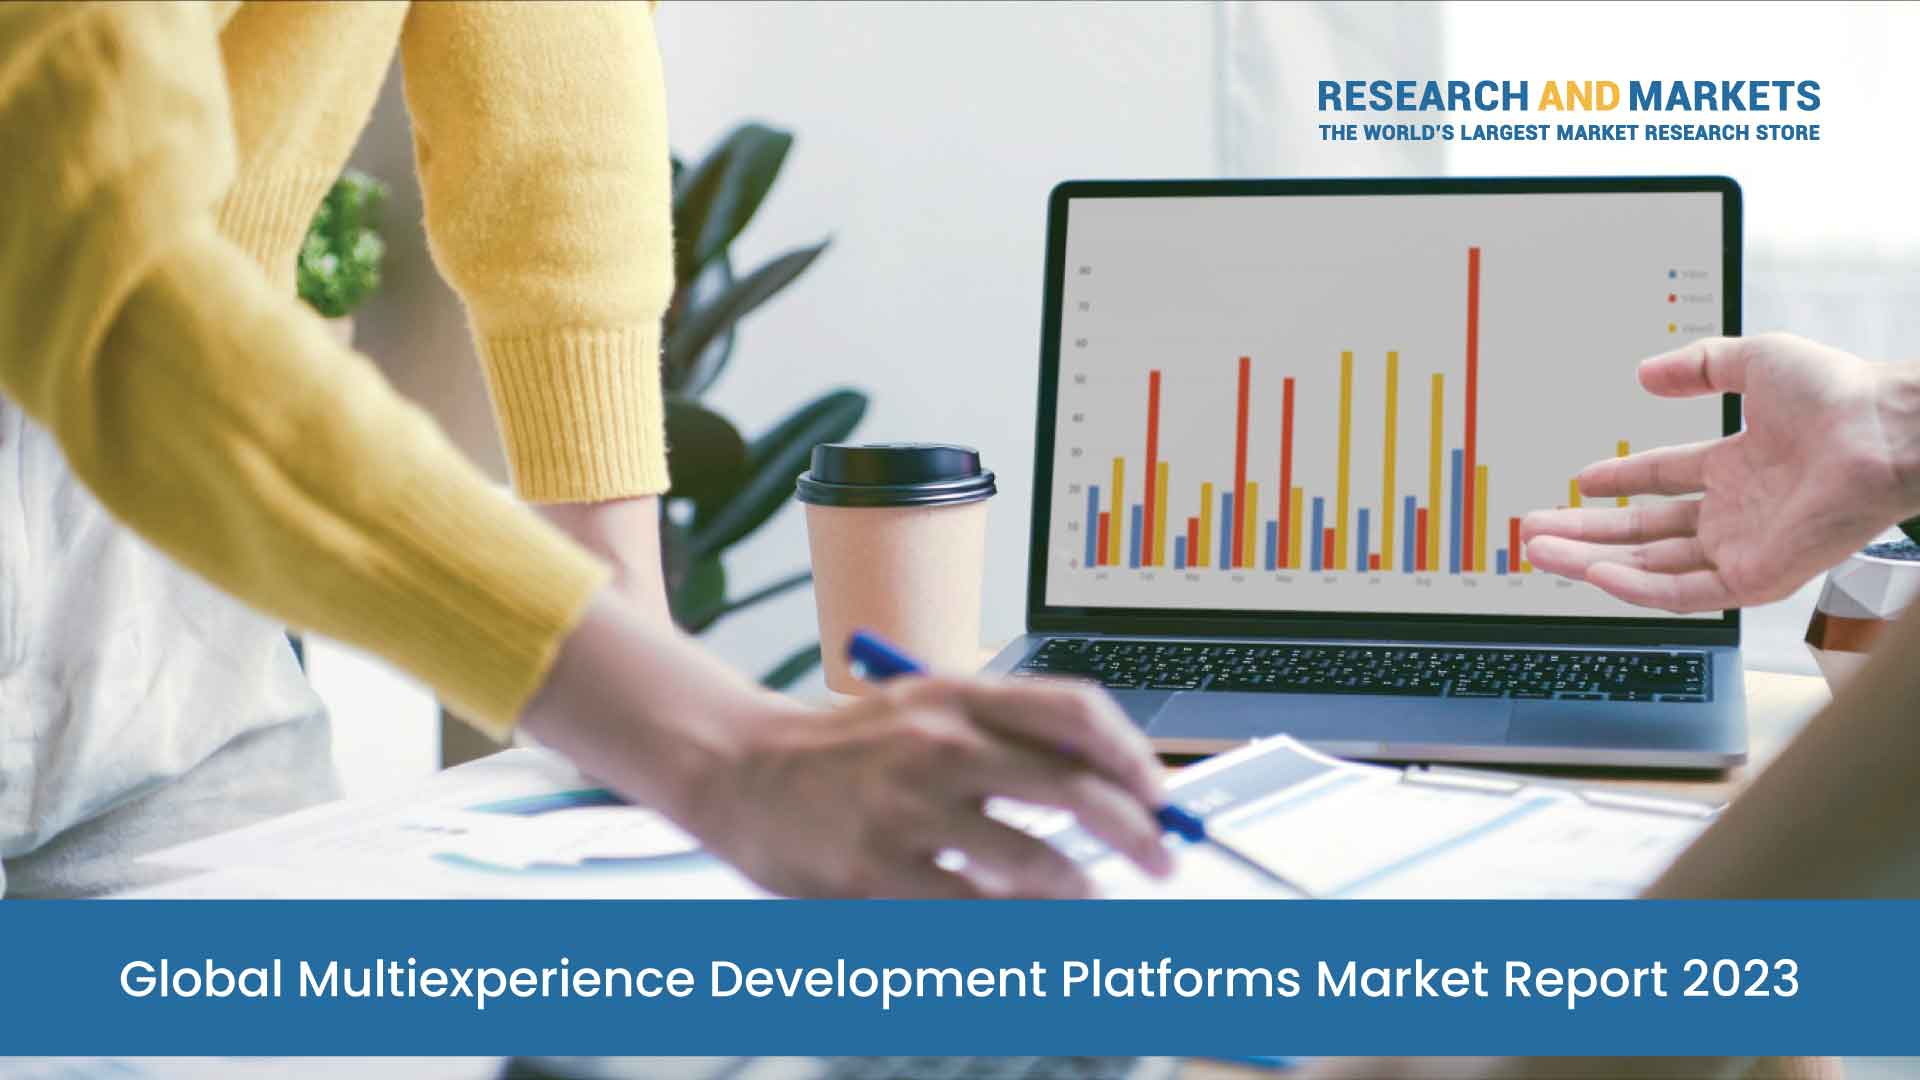 Global Multiexperience Development Platforms Market Report 2023: A $7.2 Billion Market by 2027 - Increasing Demand for Chatbots, Ai, and Ml Technologies